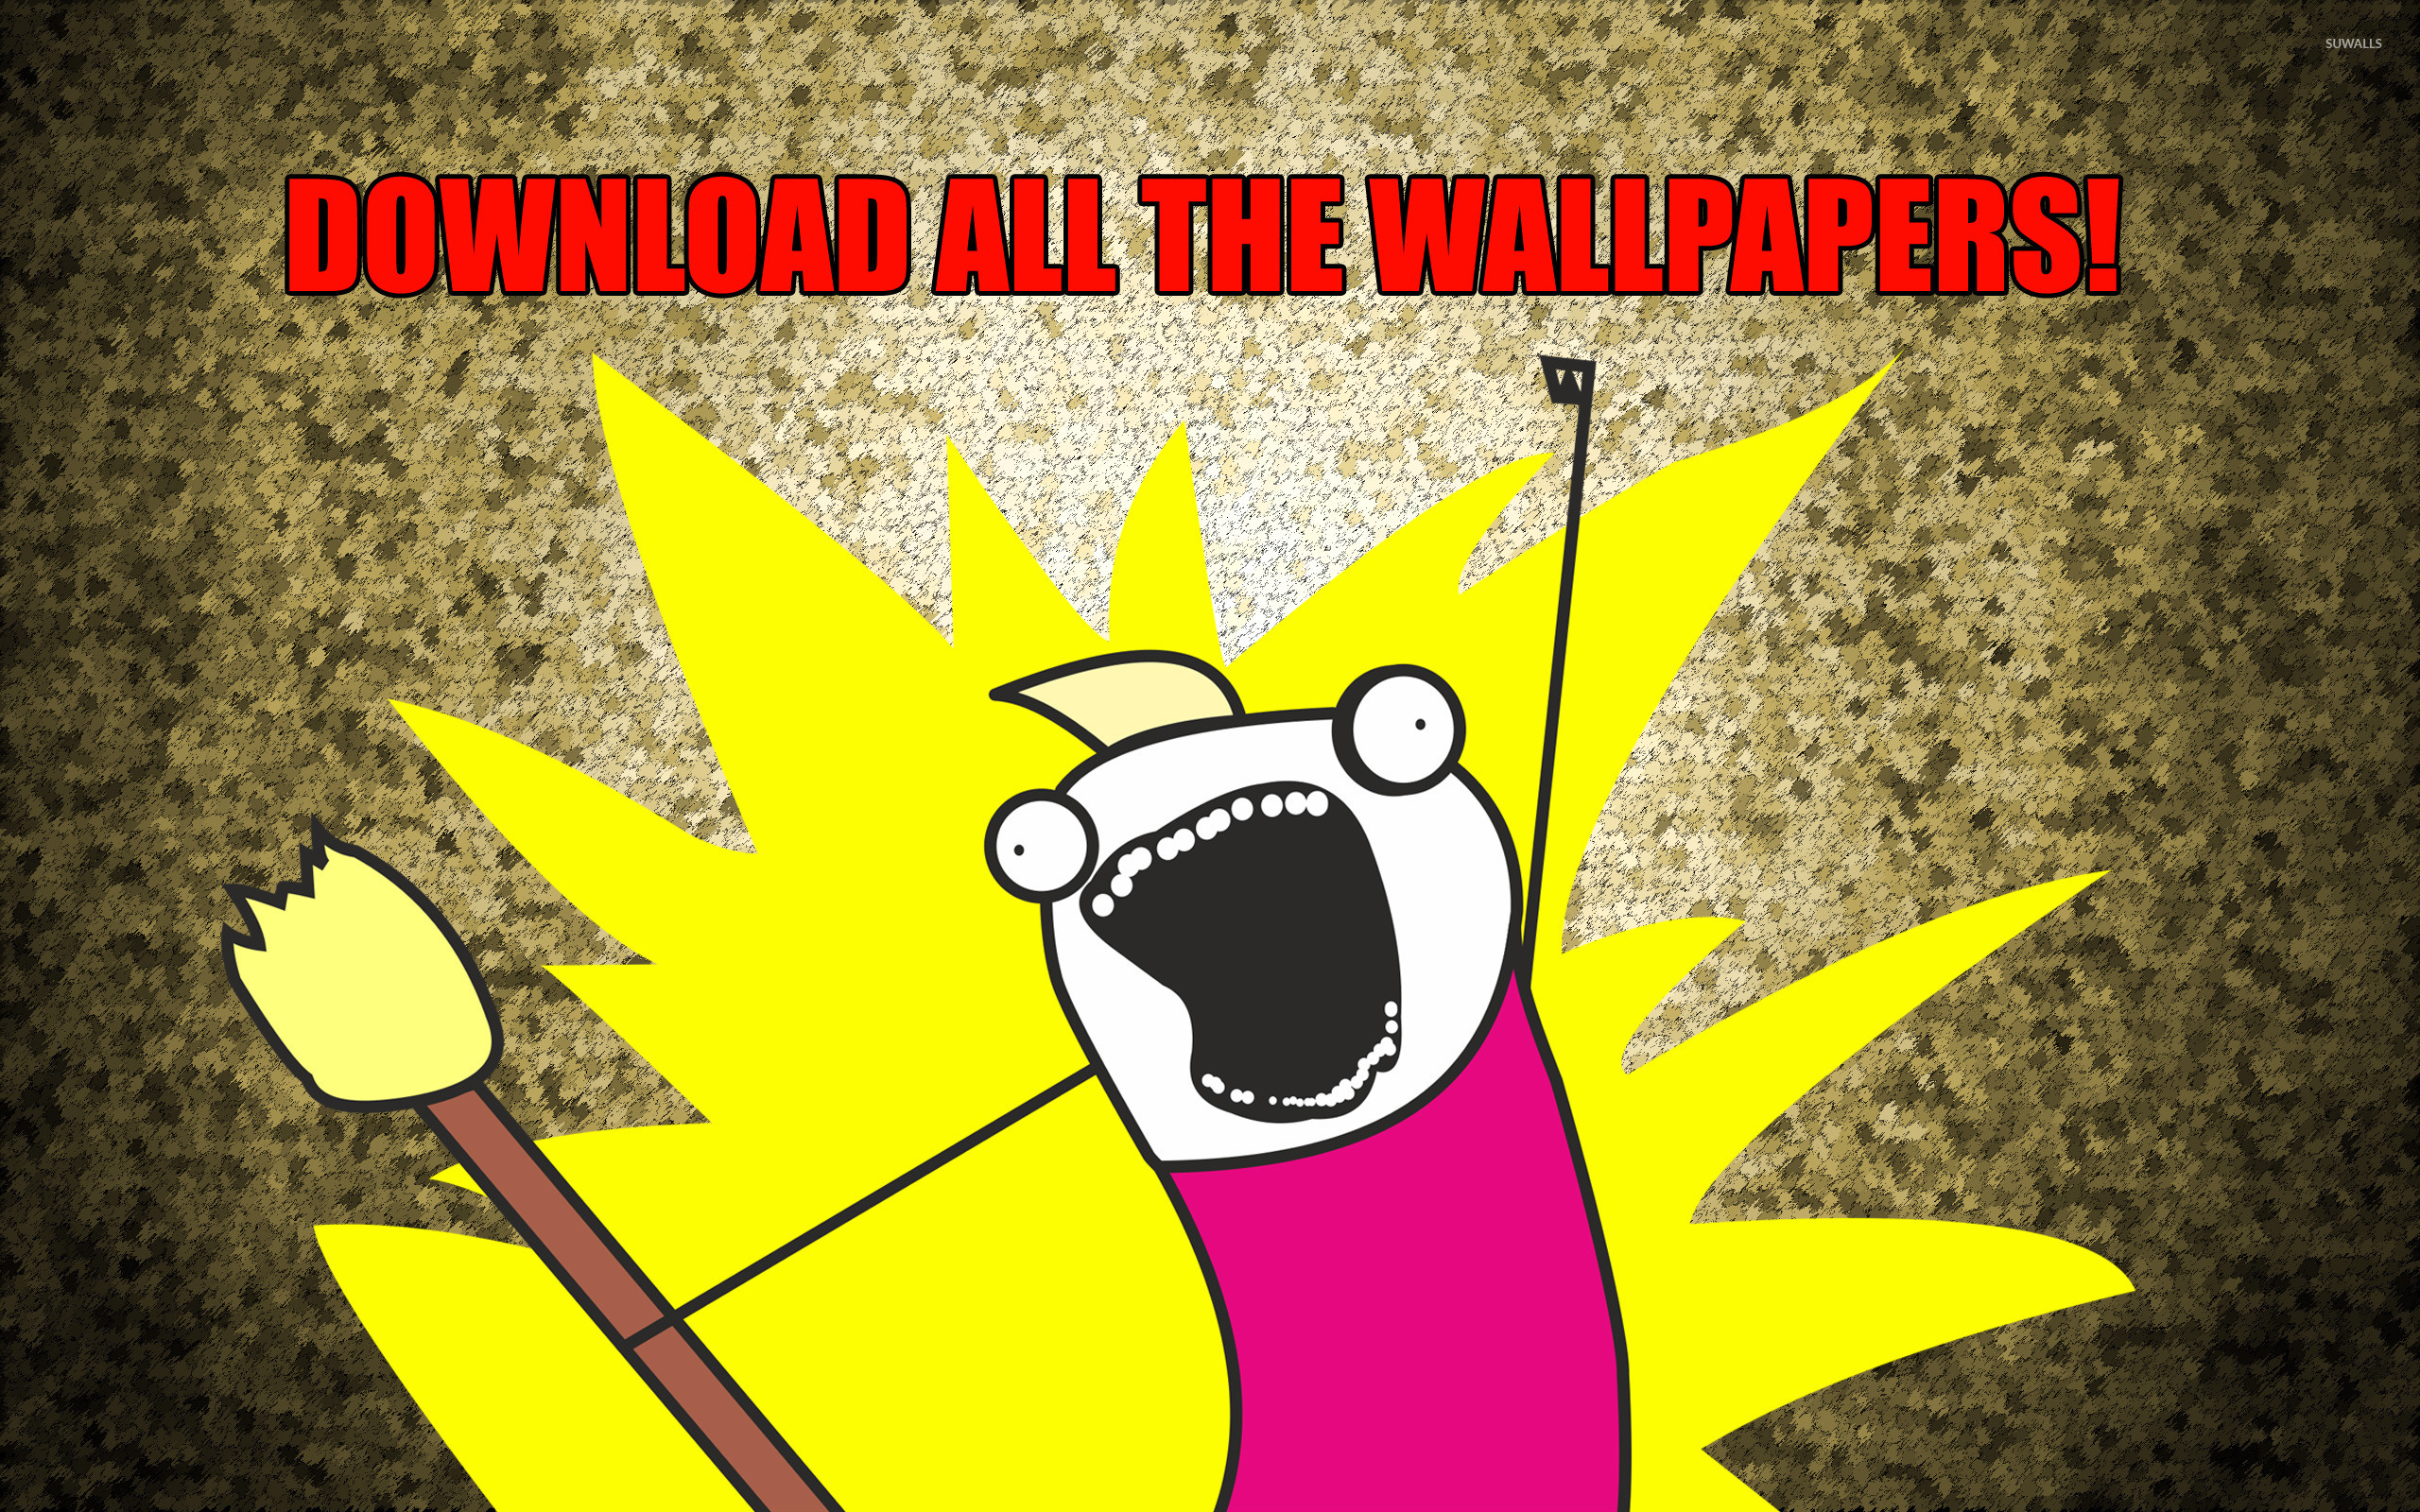 Download All The Wallpapers Wallpaper Meme Wallpapers 11150